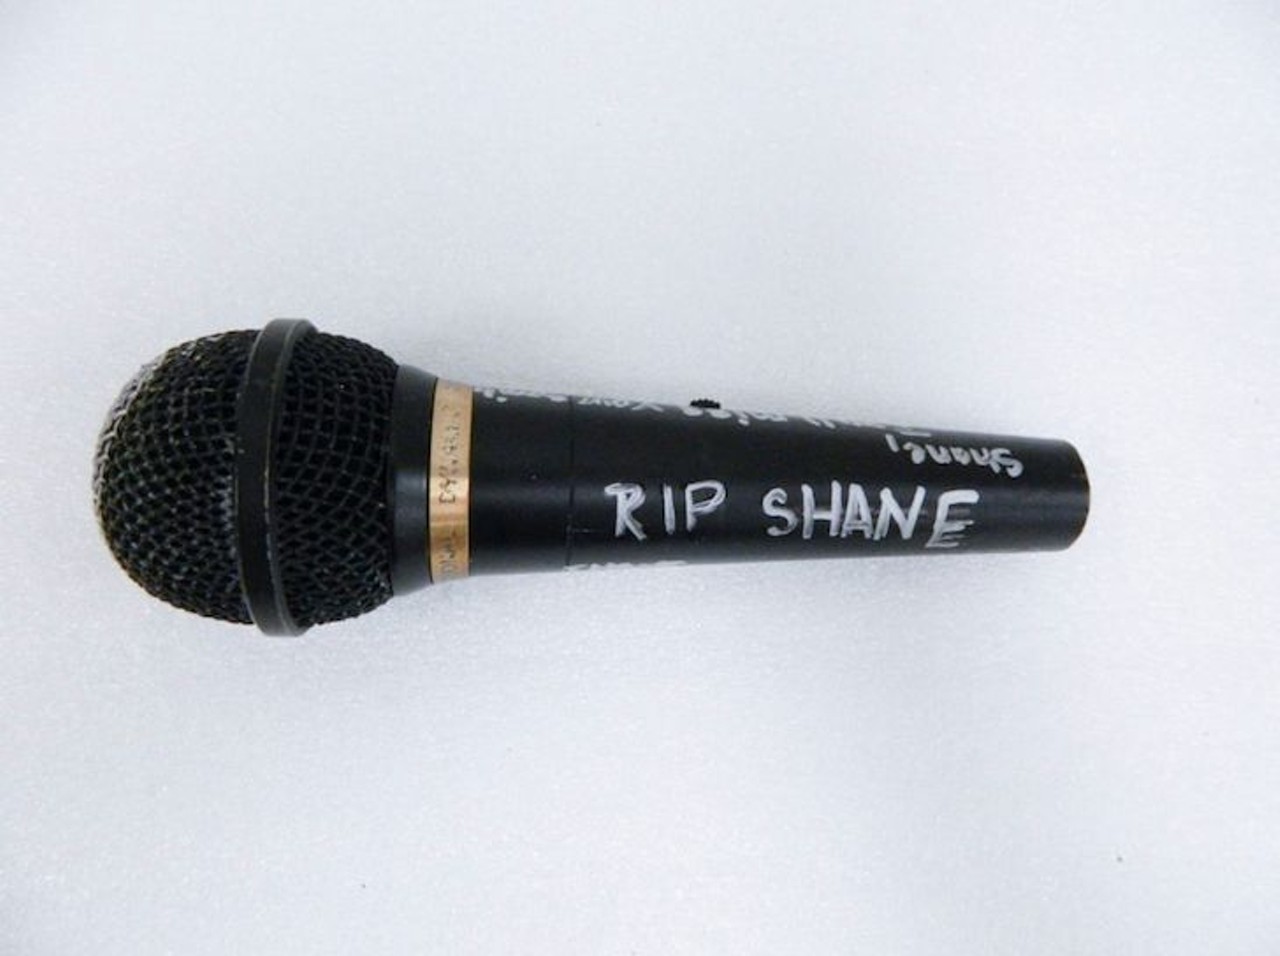 Microphone 
Description: 
Microphone with a handwritten message in silver marker that says, &#147;Shane, I WILL MISS YOU FOREVER. Shane, I will miss your smile, laughter & your beautiful soul! Love you Forever. RIP SHANE. I (heart) u !!!&#148; There is a white heart drawn on the windscreen of the microphone.